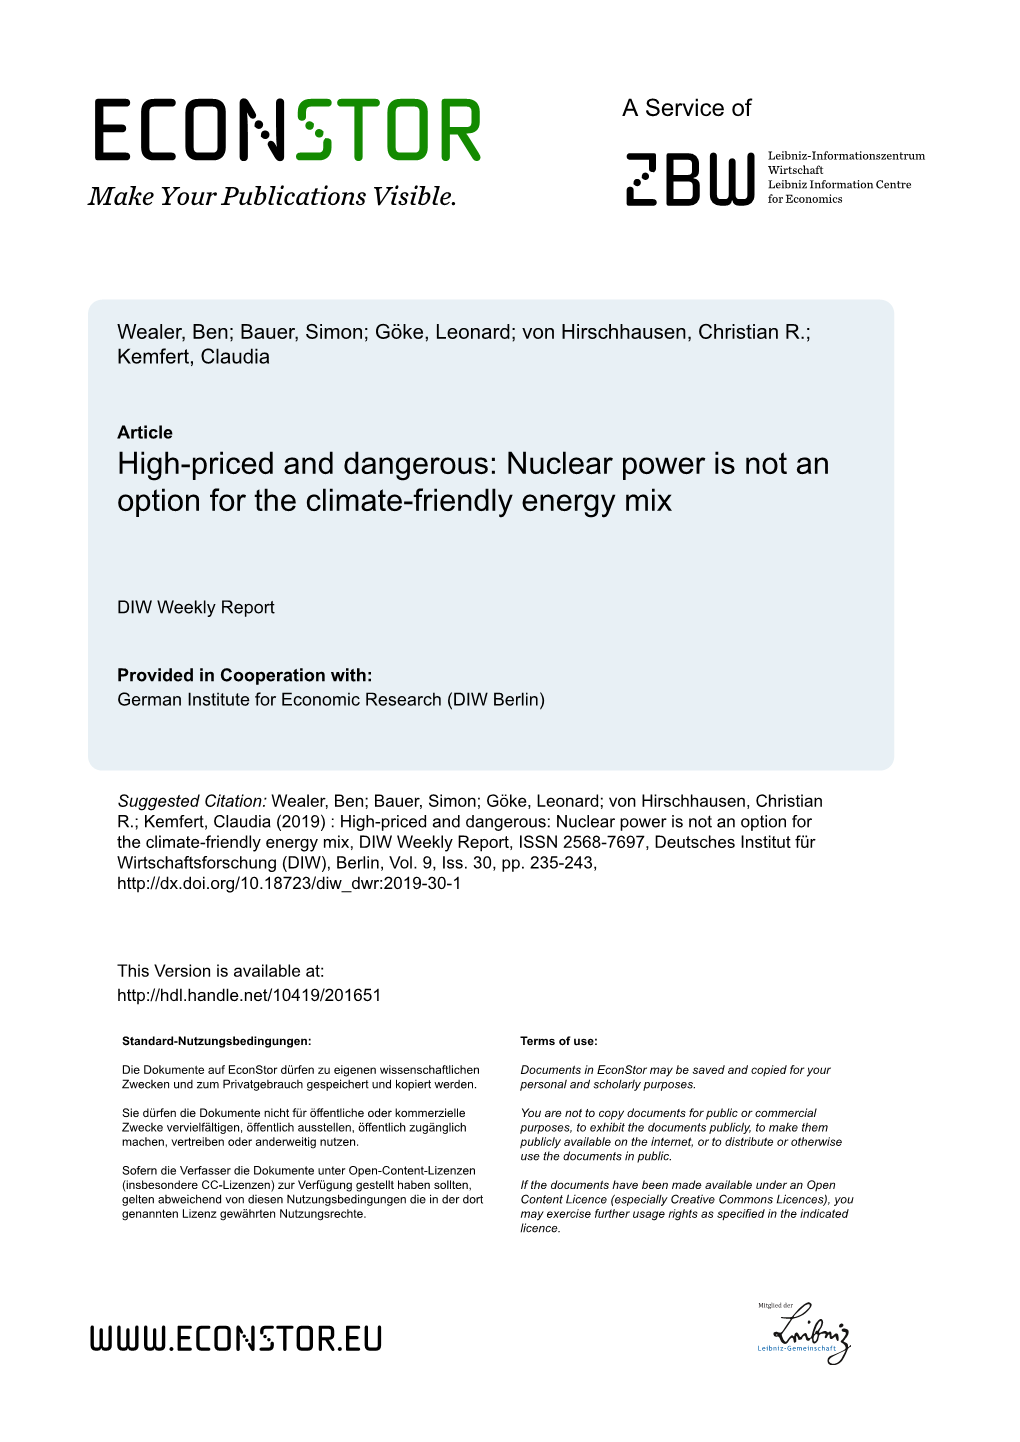 Nuclear Power Is Not an Option for the Climate-Friendly Energy Mix